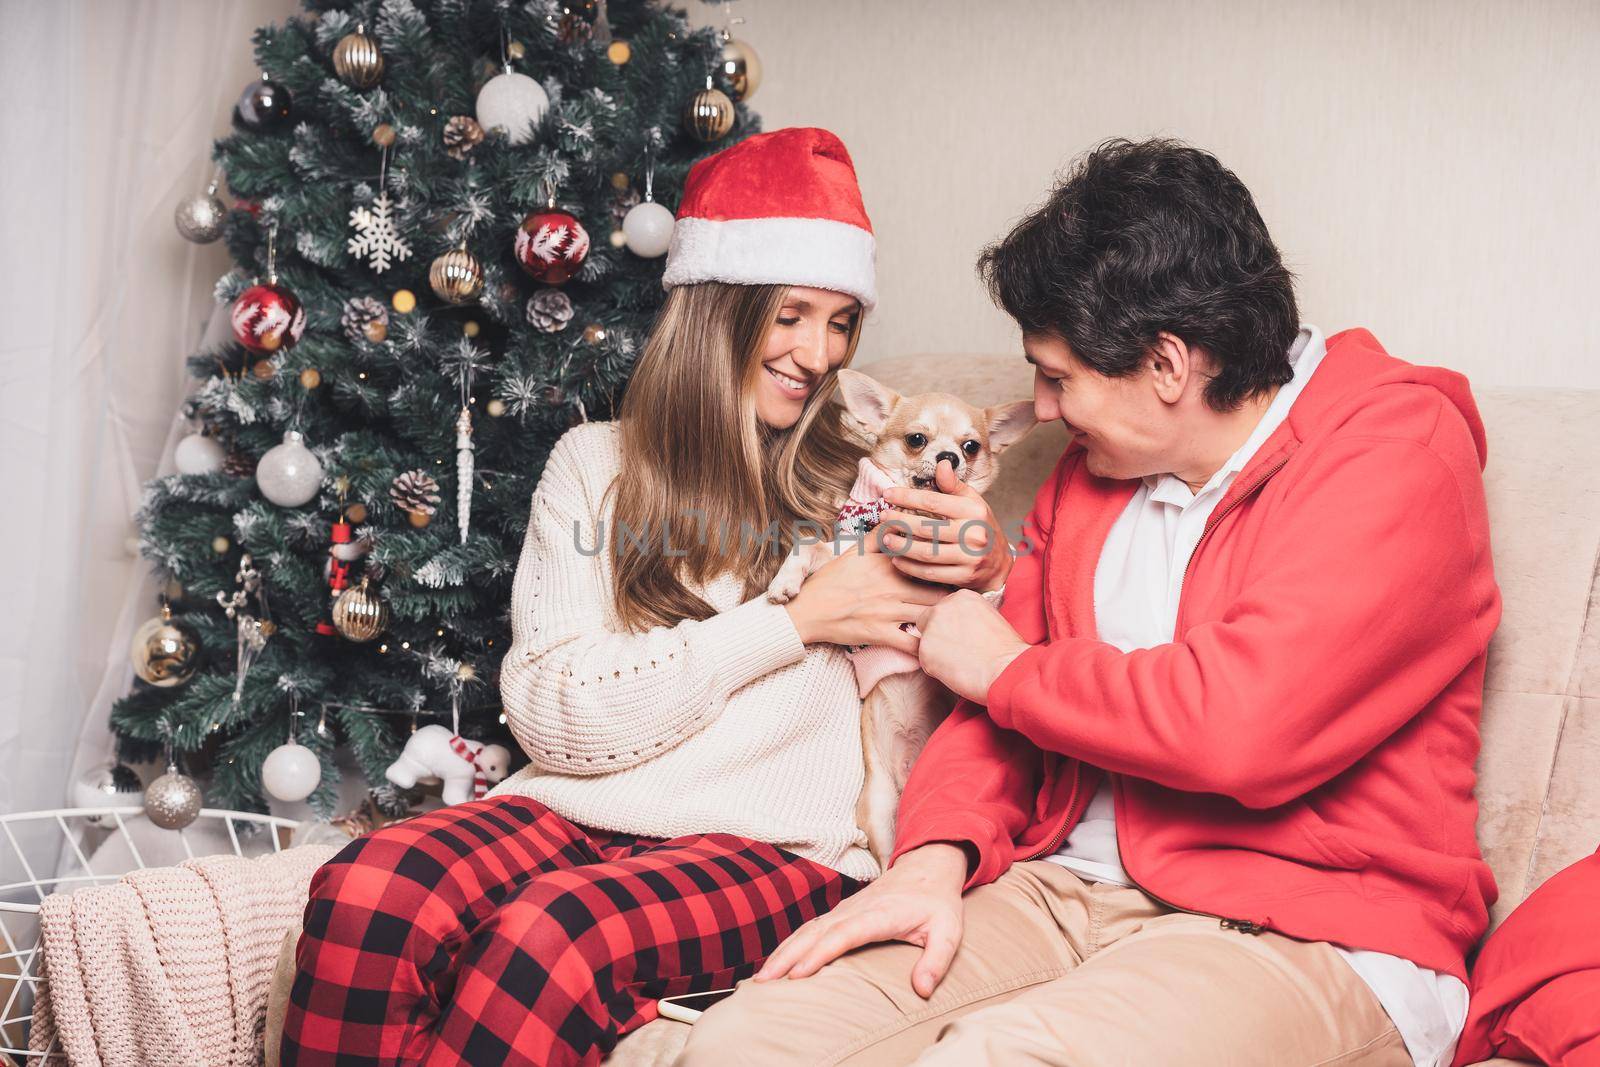 Romantic couple man and woman giving Christmas gift sweater to cute puppy dog chihuahua on Christmas holidays.